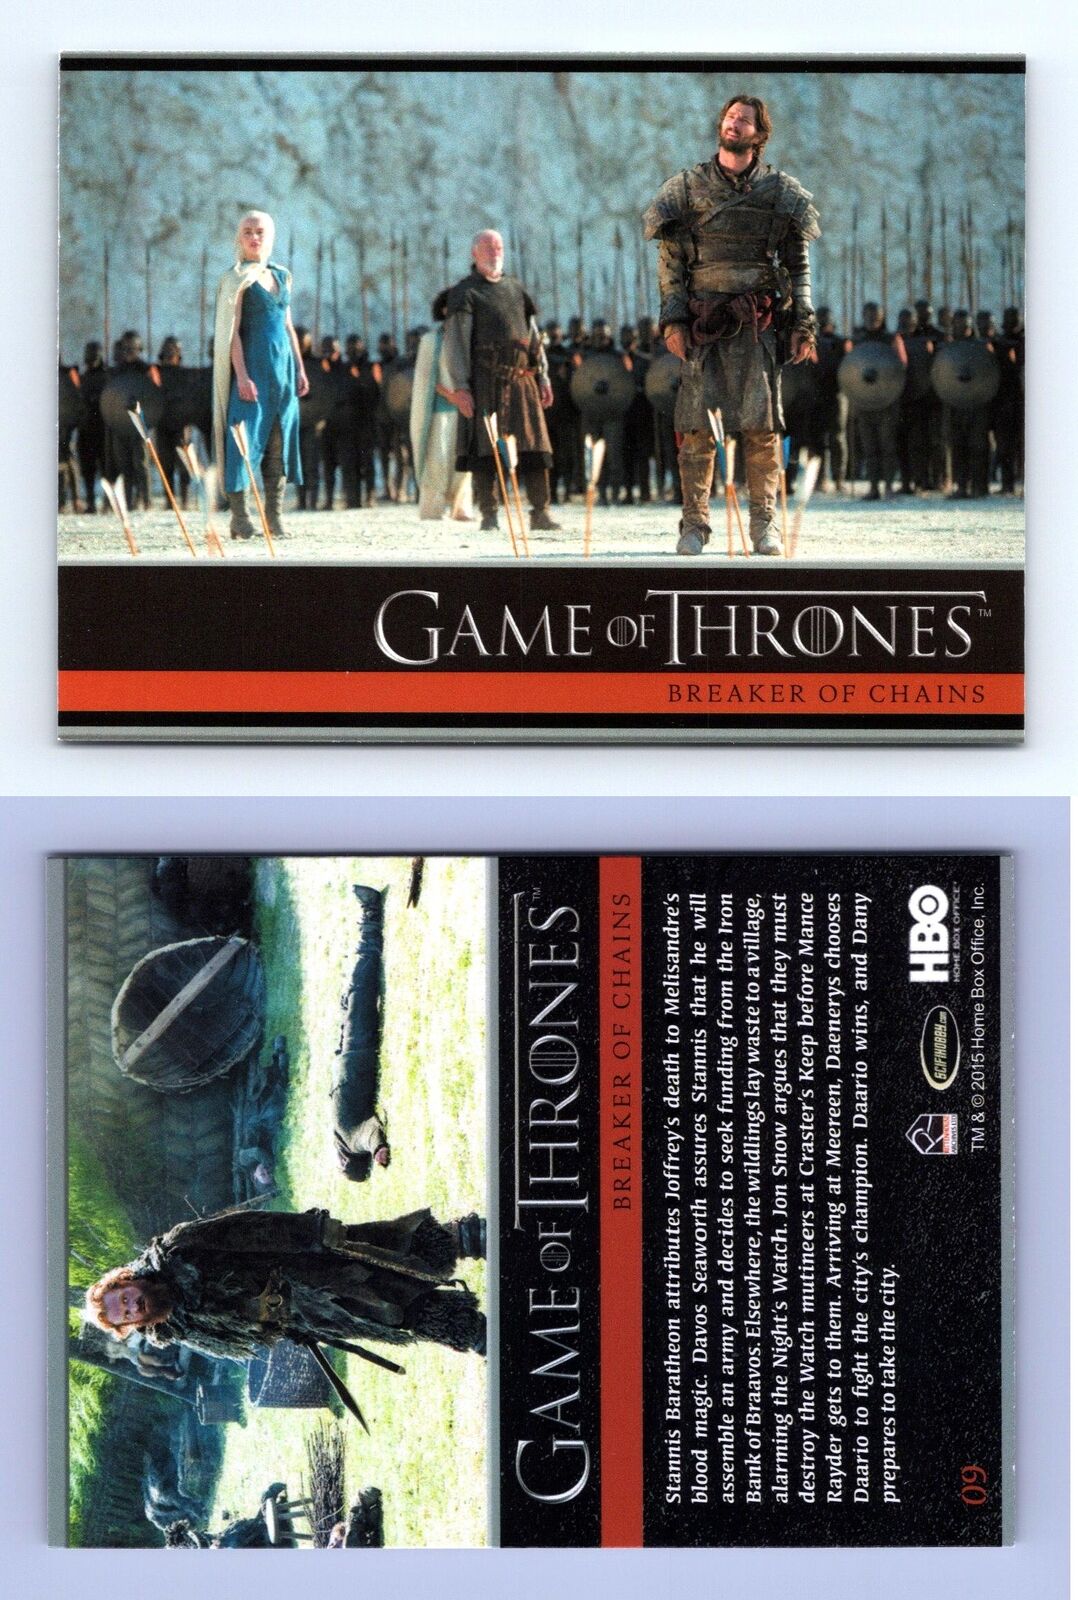 Breaker Of Chains #9 Game Of Thrones Season 4 Rittenhouse 2015 Trading Card